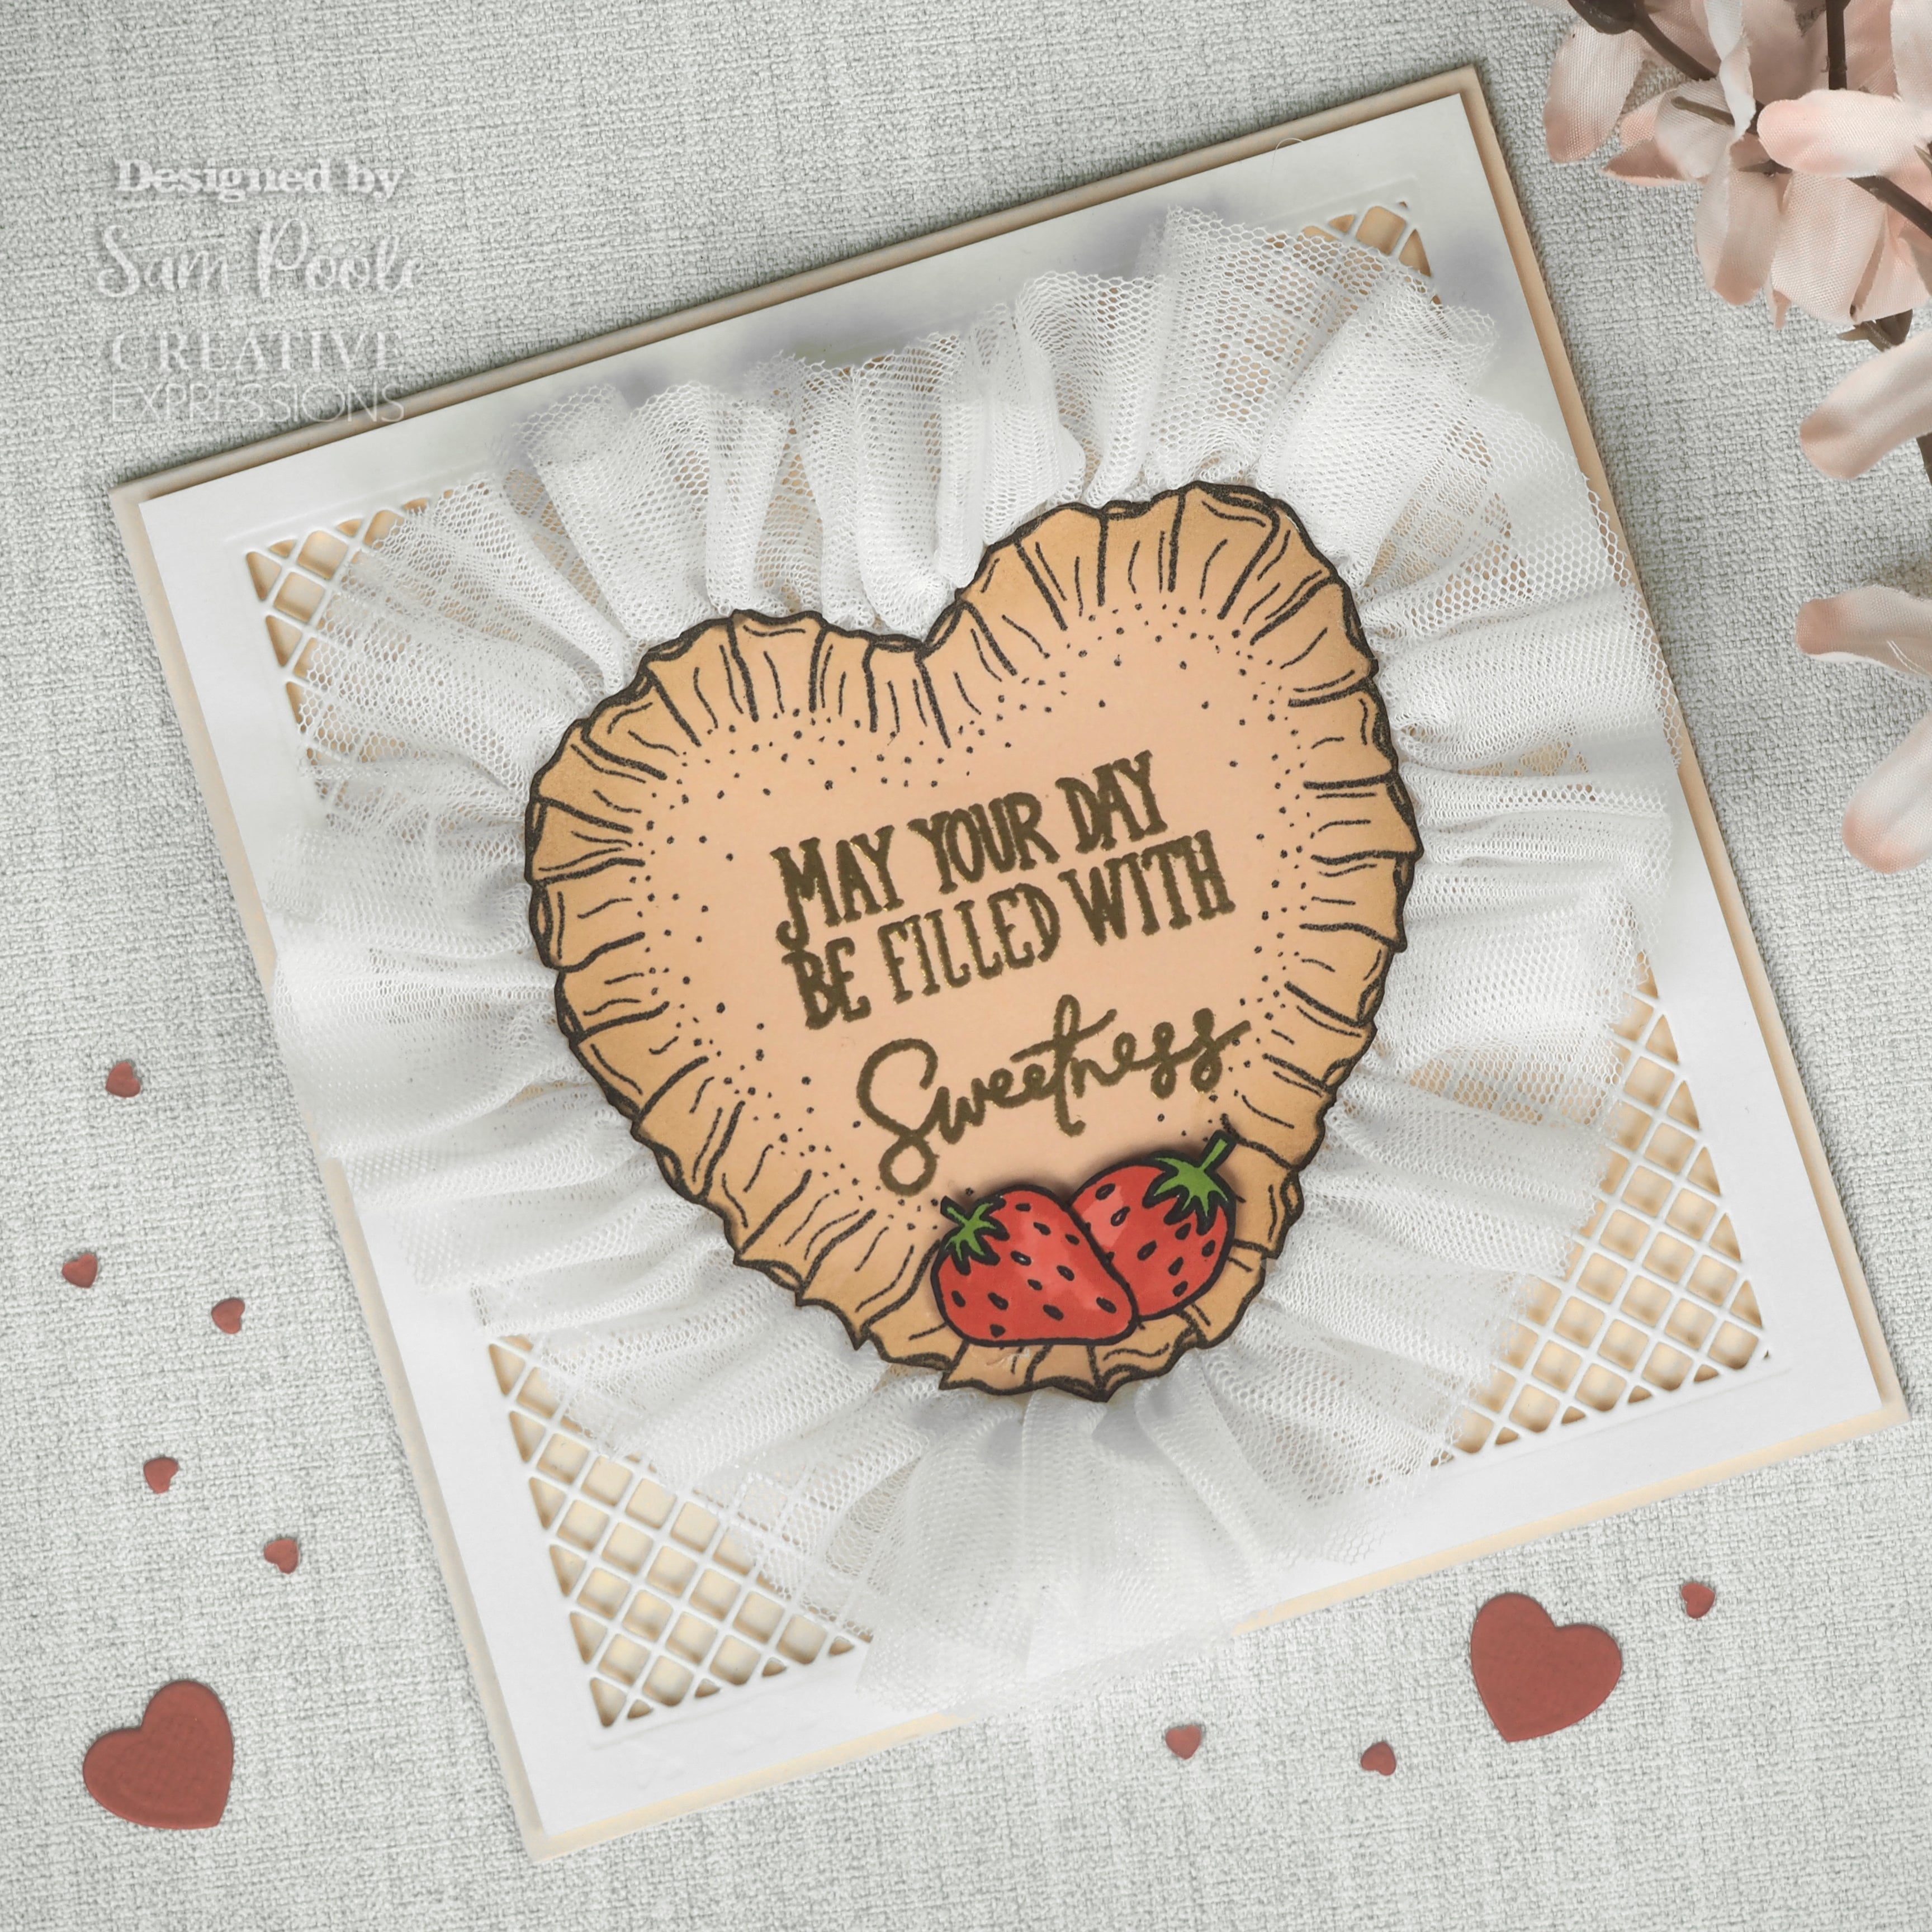 Creative Expressions Sam Poole Sweetness Heart 6 in x 4 in Clear Stamp Set